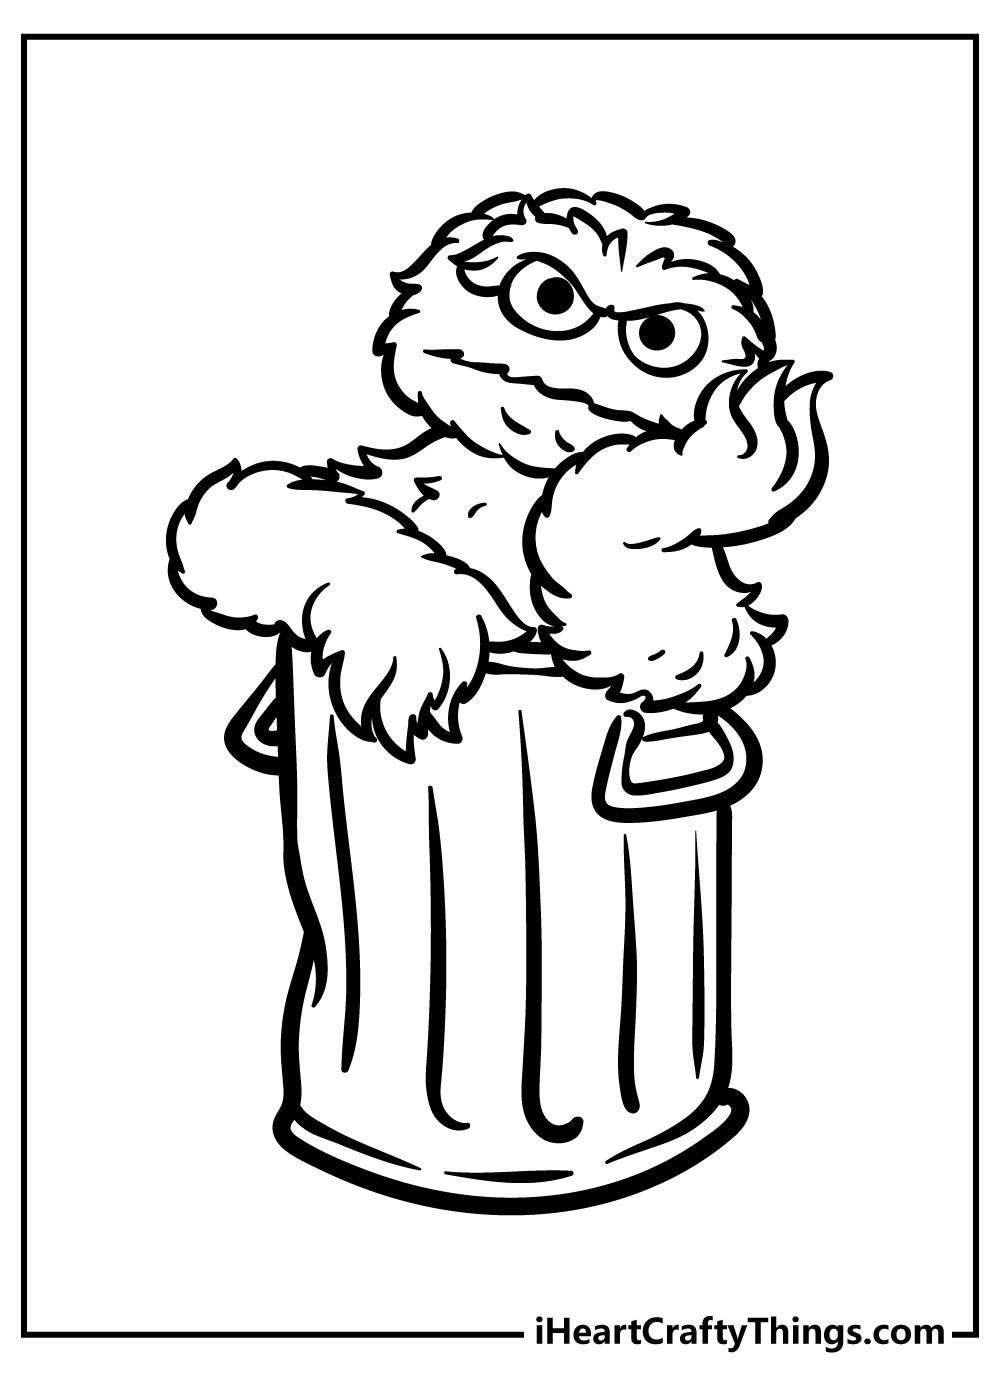 Sesame Street Coloring Pages for adults free printable